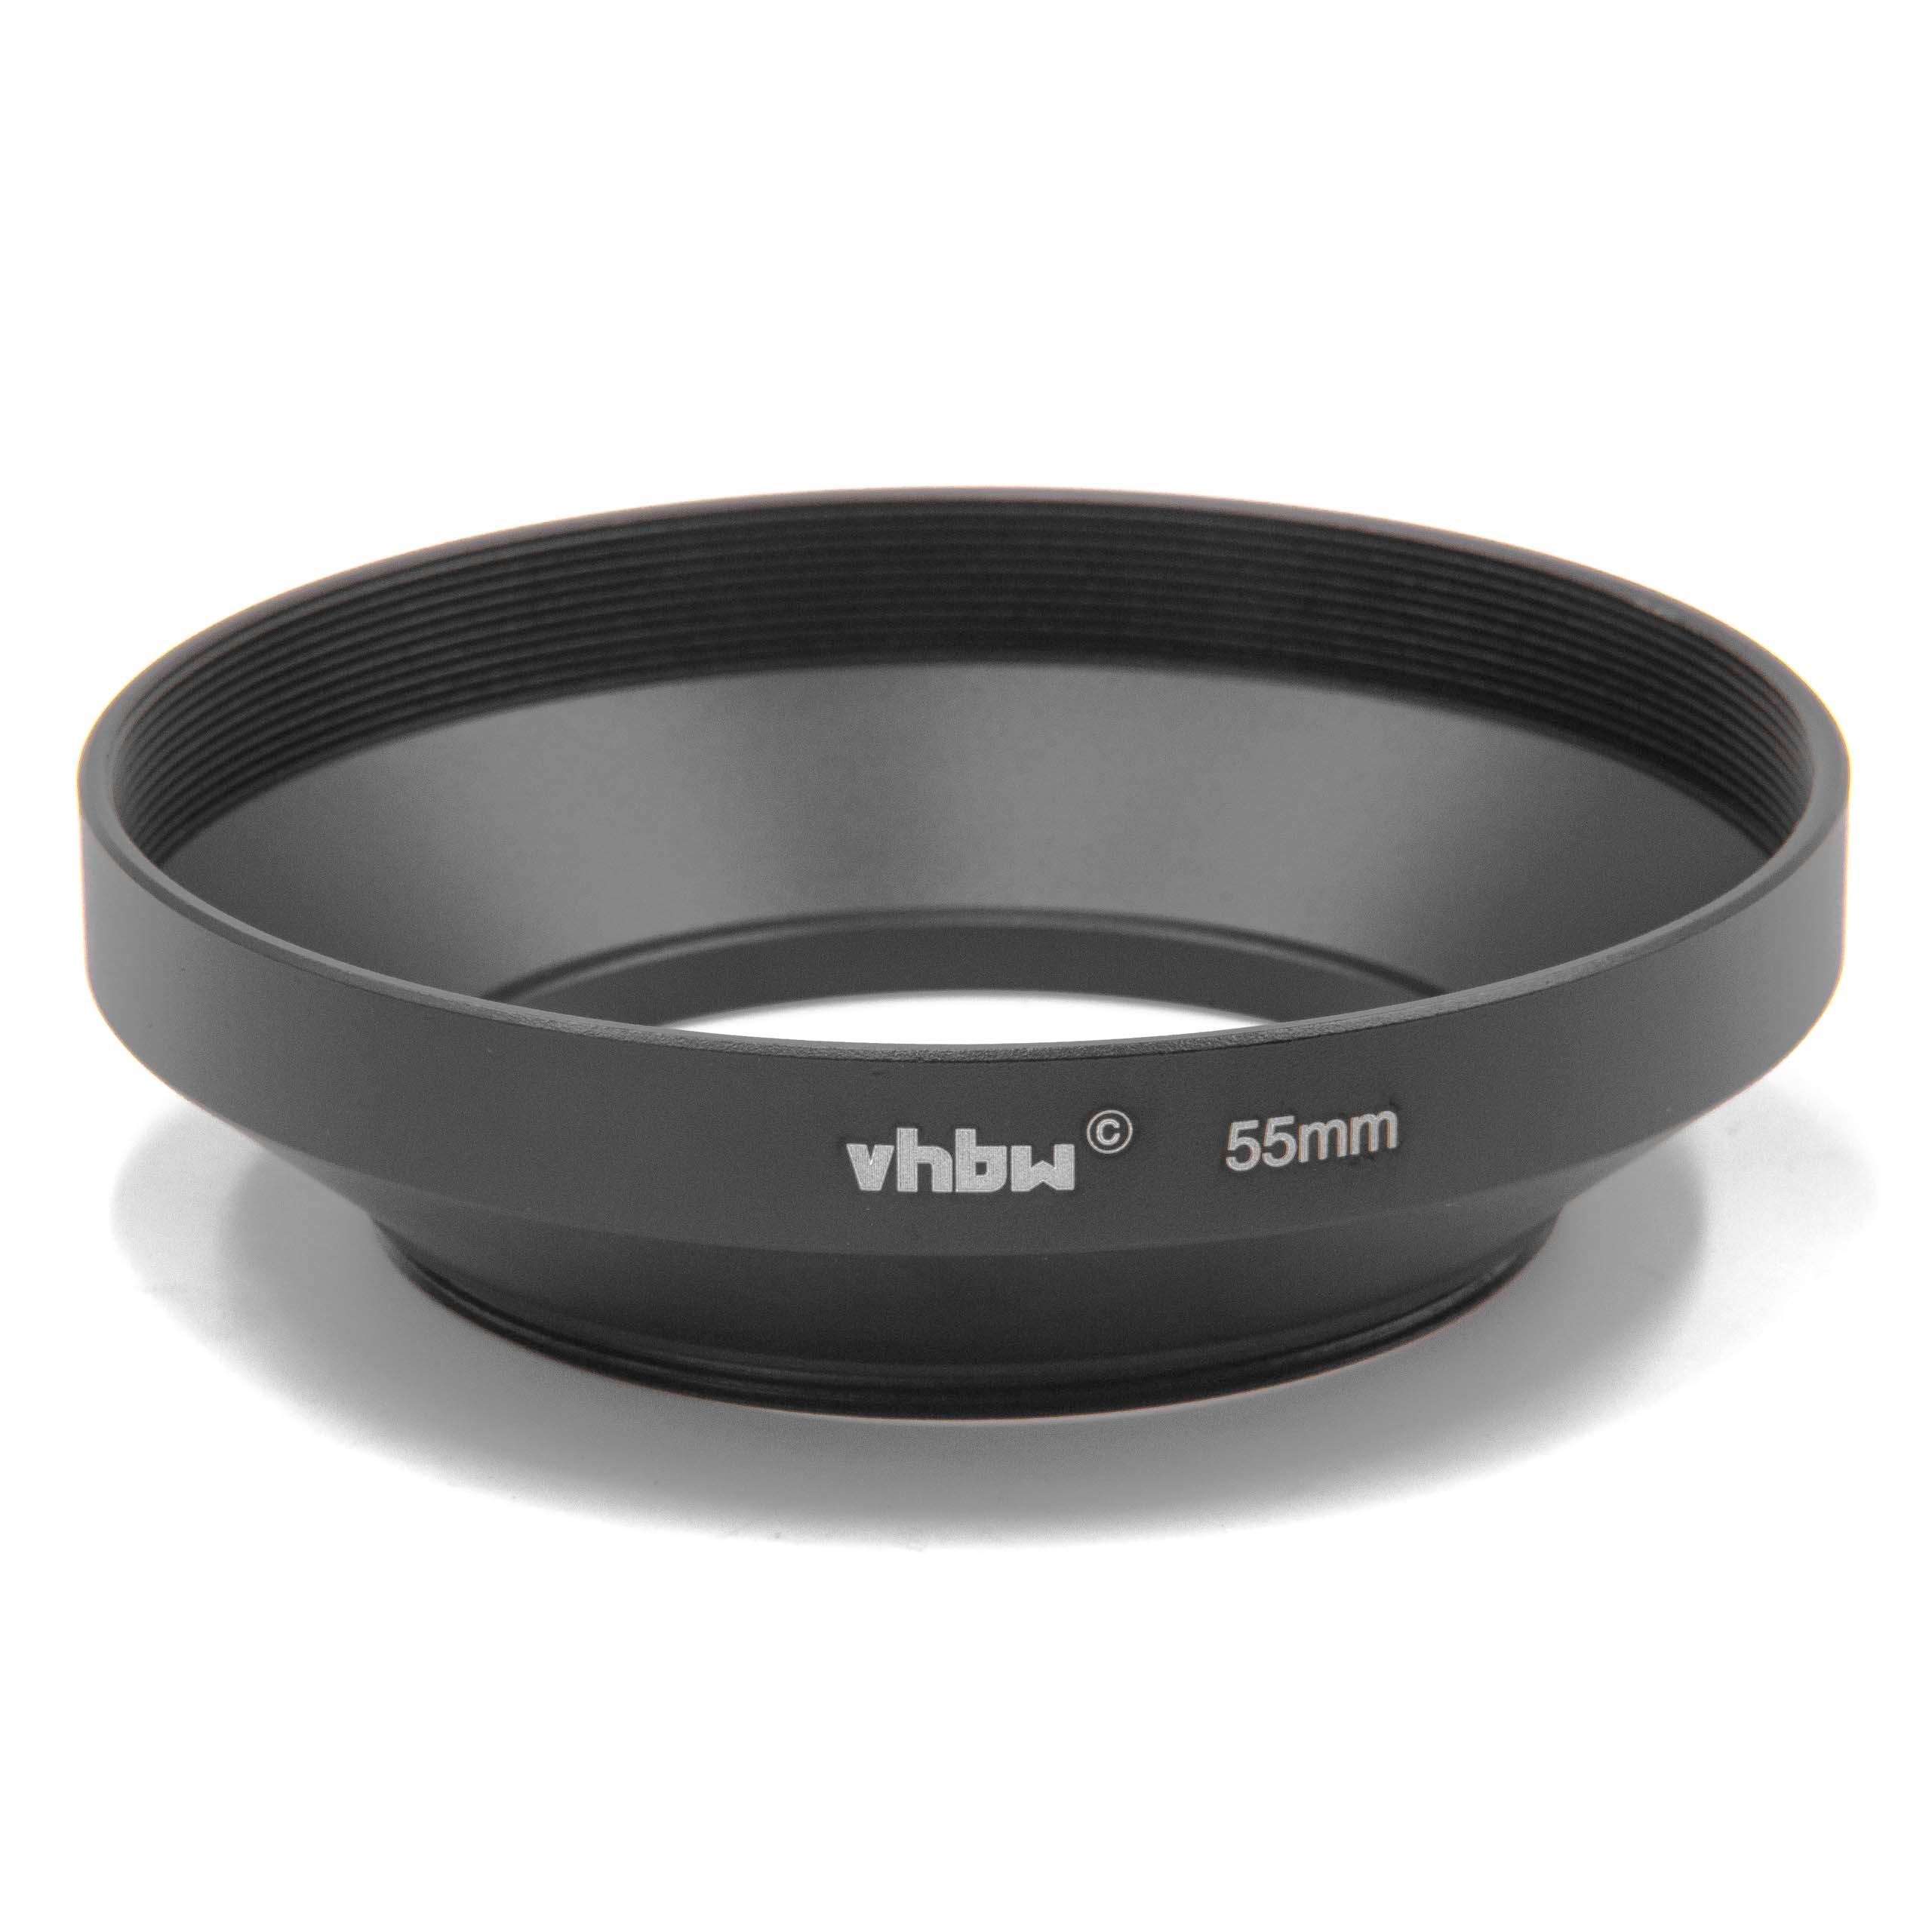 Lens Hood suitable for 55mm Lens - Wide-Angle Lens Shade Black, Round